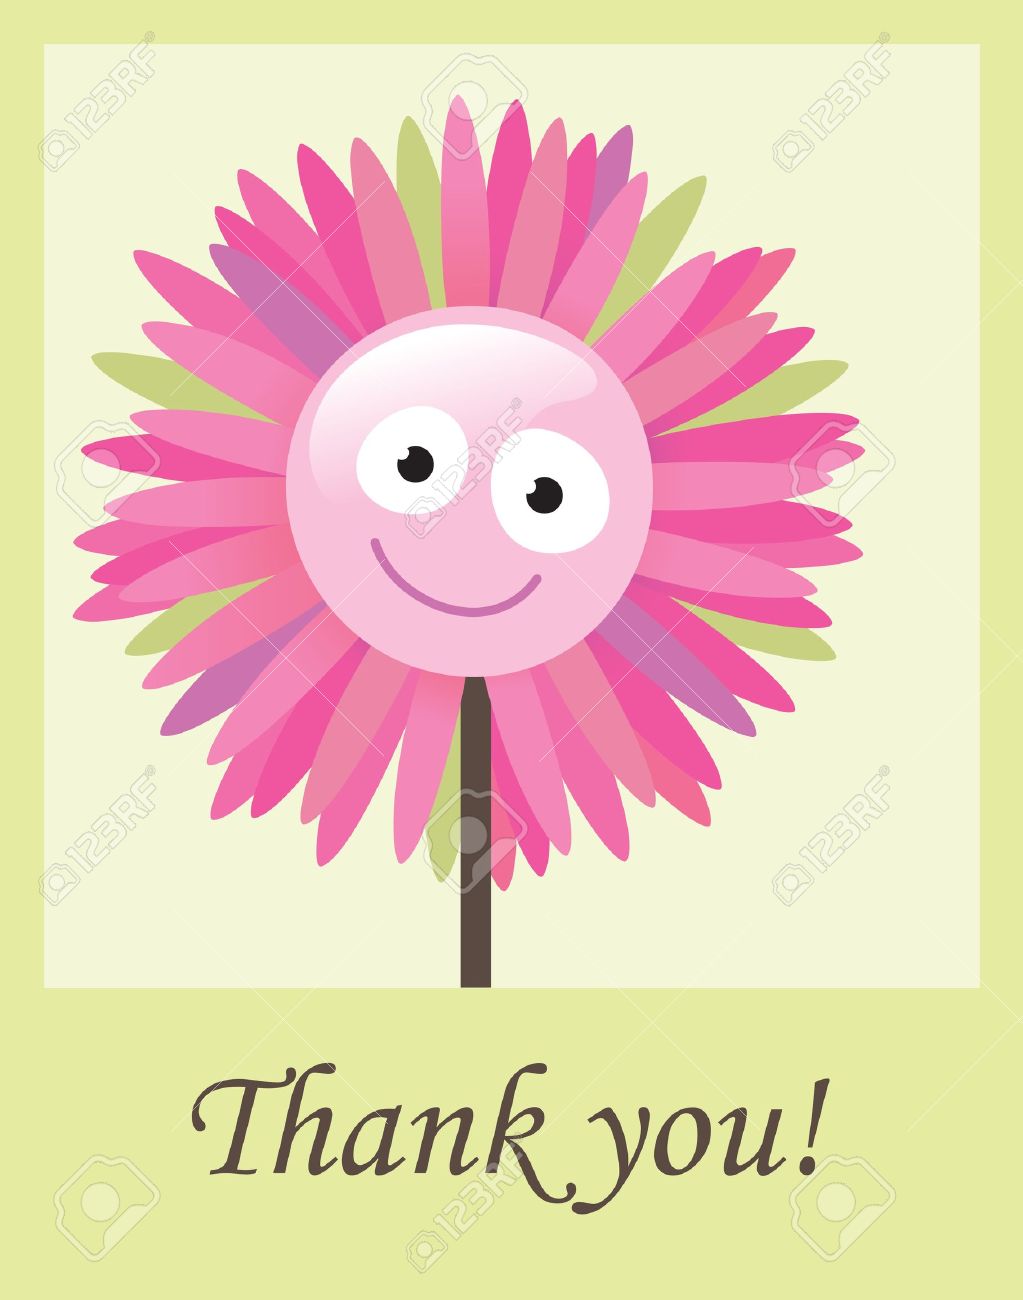 clipart thank you flowers - photo #8